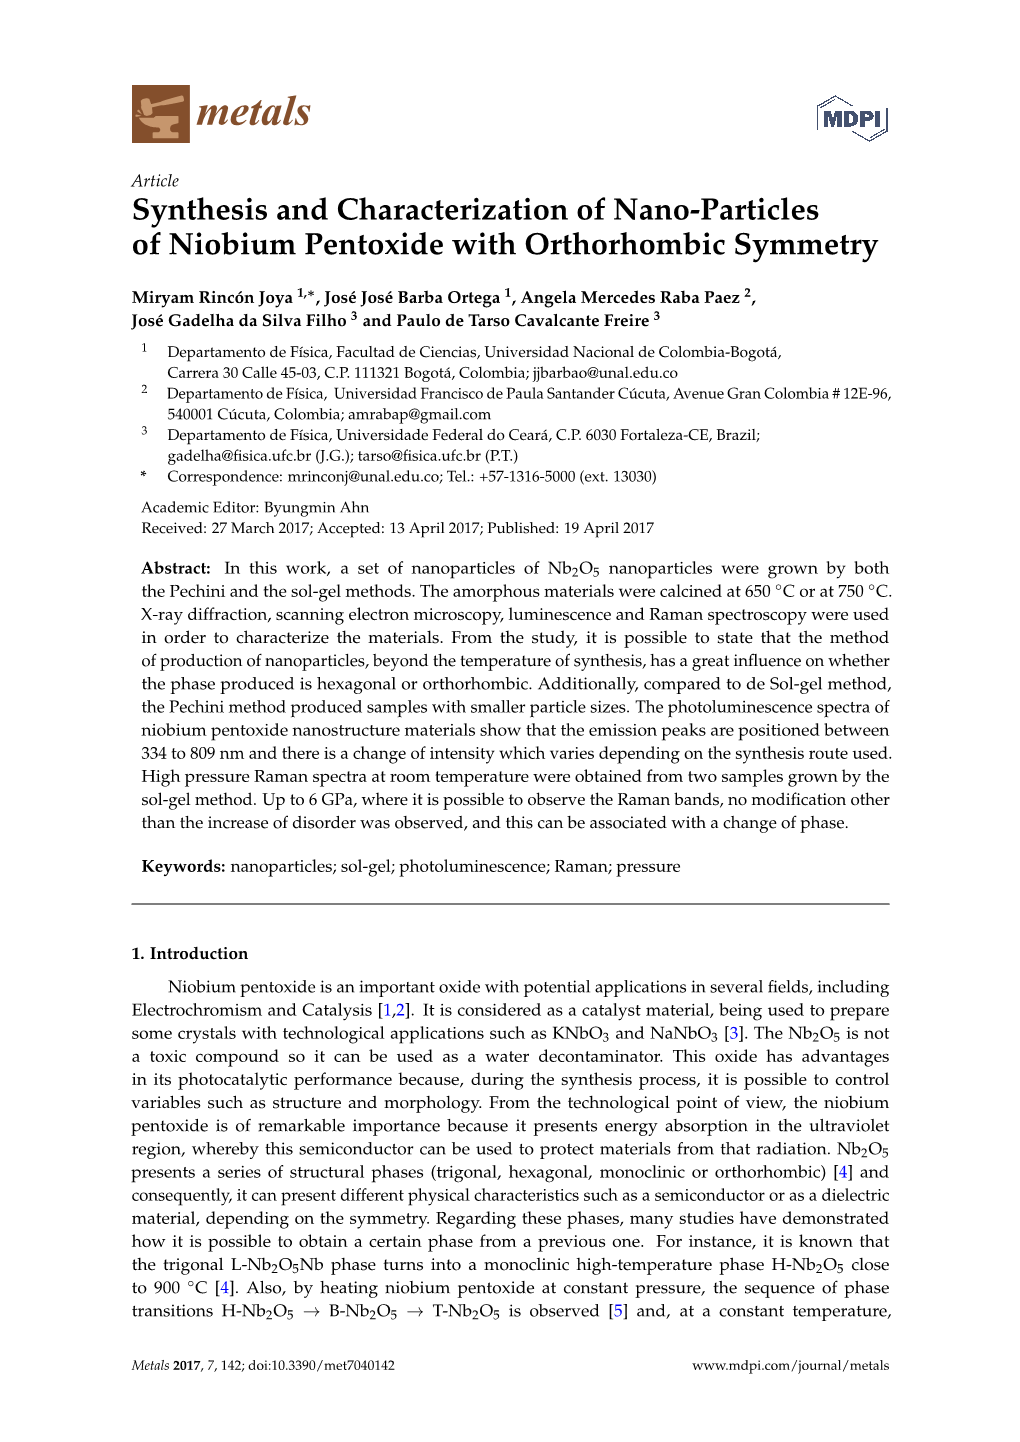 Synthesis and Characterization of Nano-Particles of Niobium Pentoxide with Orthorhombic Symmetry